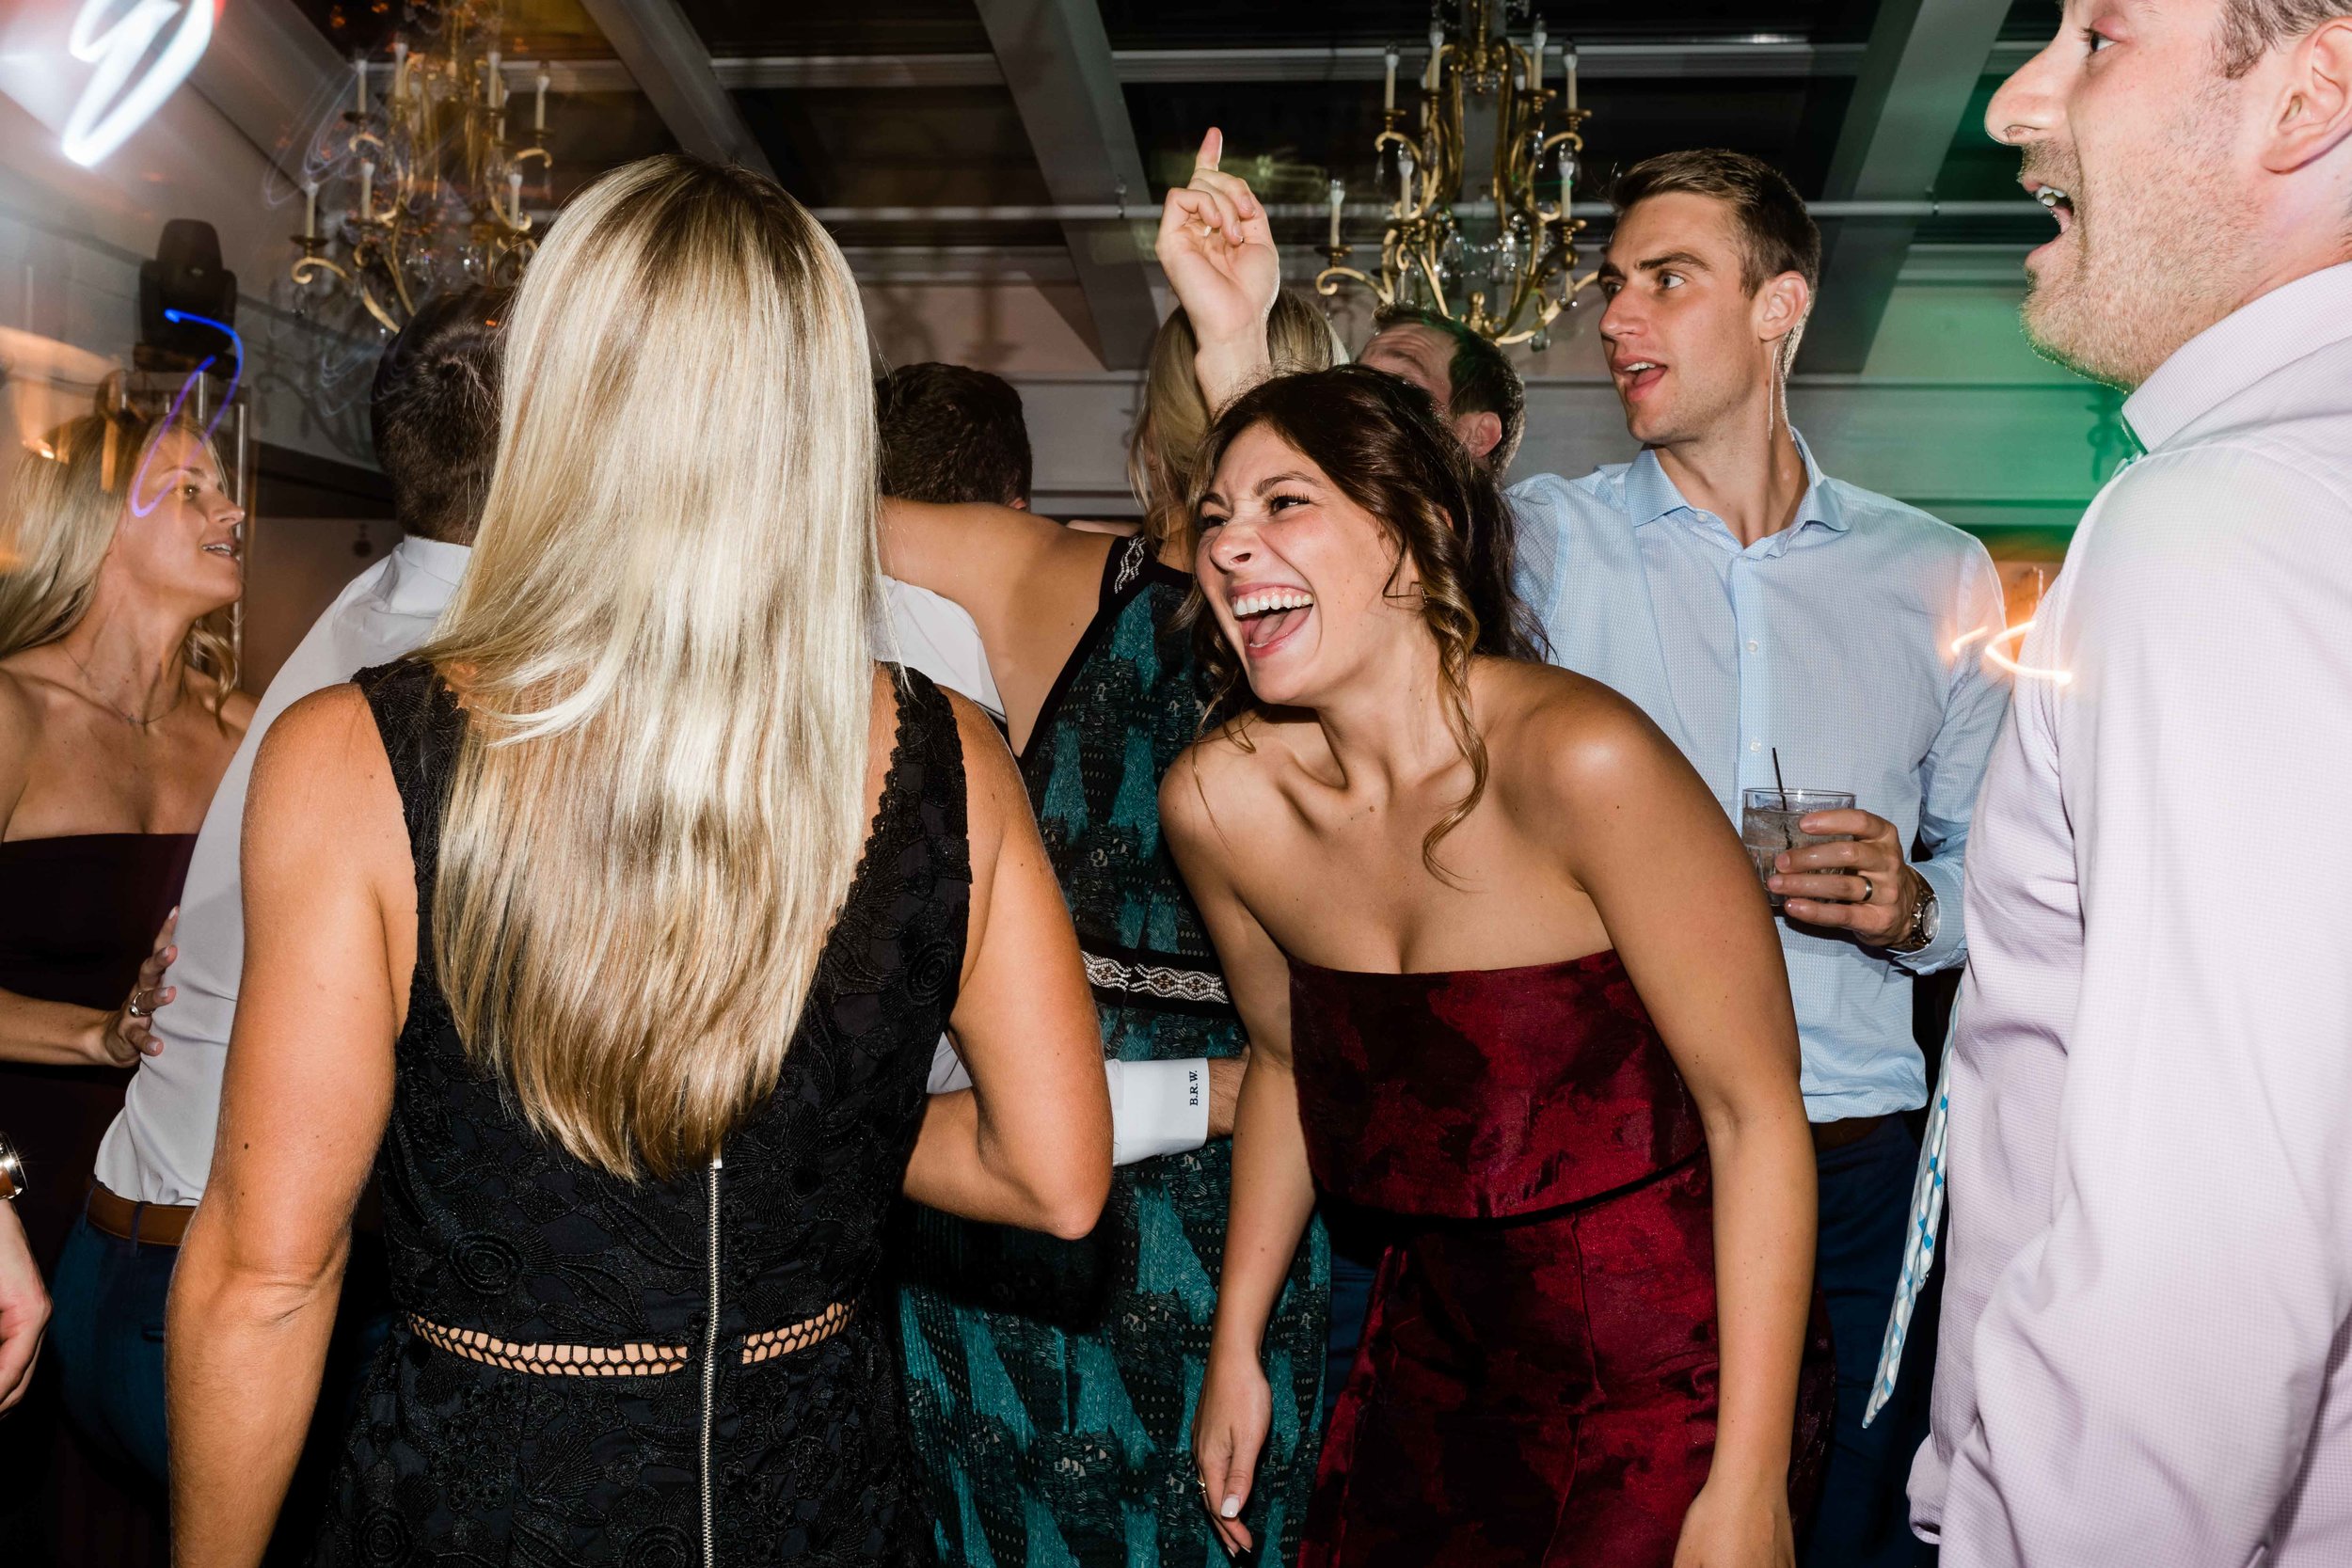 Wedding guests laughing on the dance floor